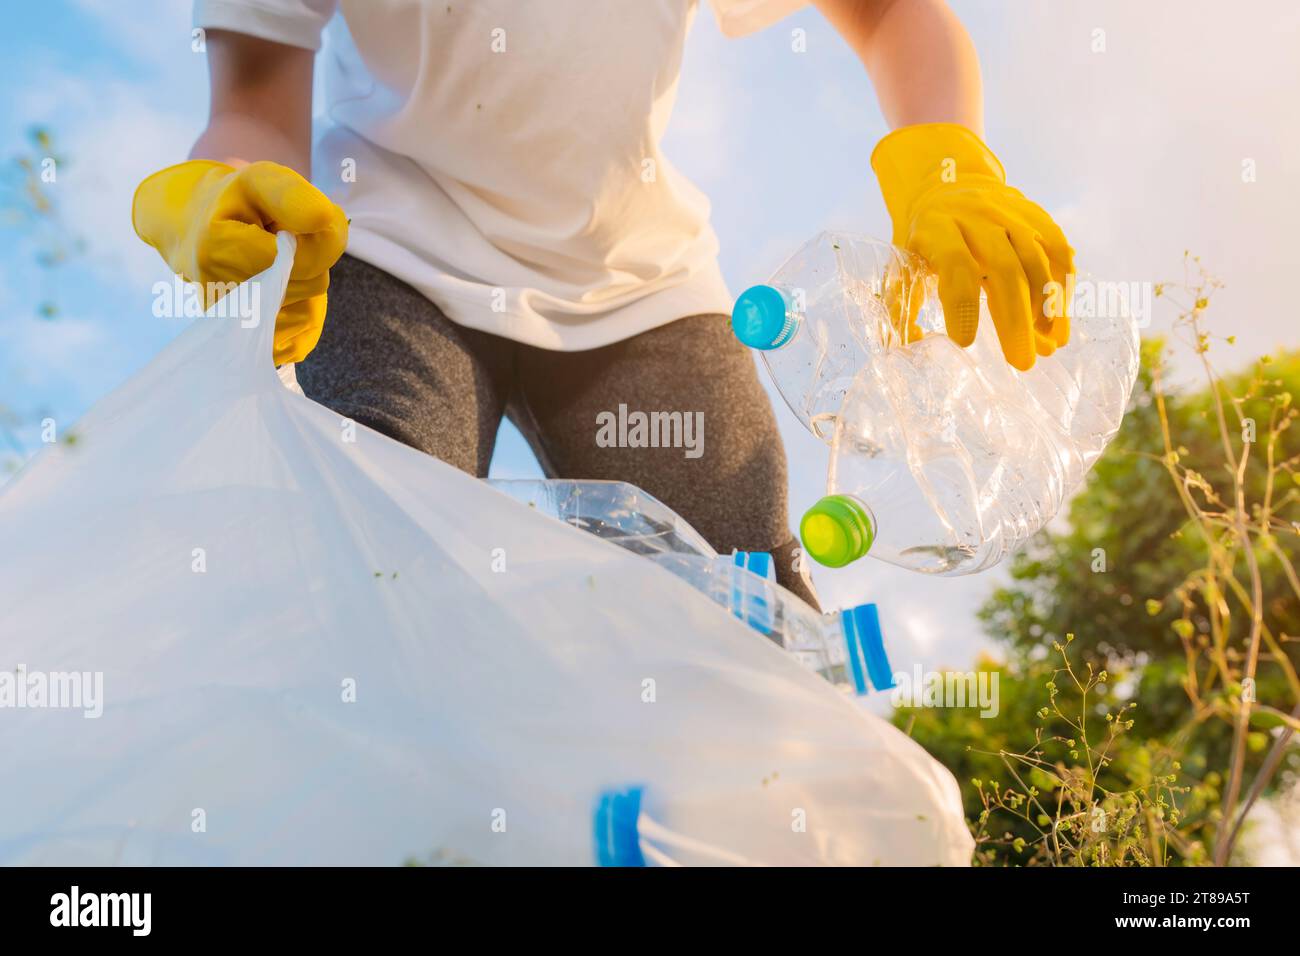 Volunteer teenage boys are holding garbage bags and Collecting plastic bottle waste at public parks for recycling, Reuse, and waste management concept Stock Photo